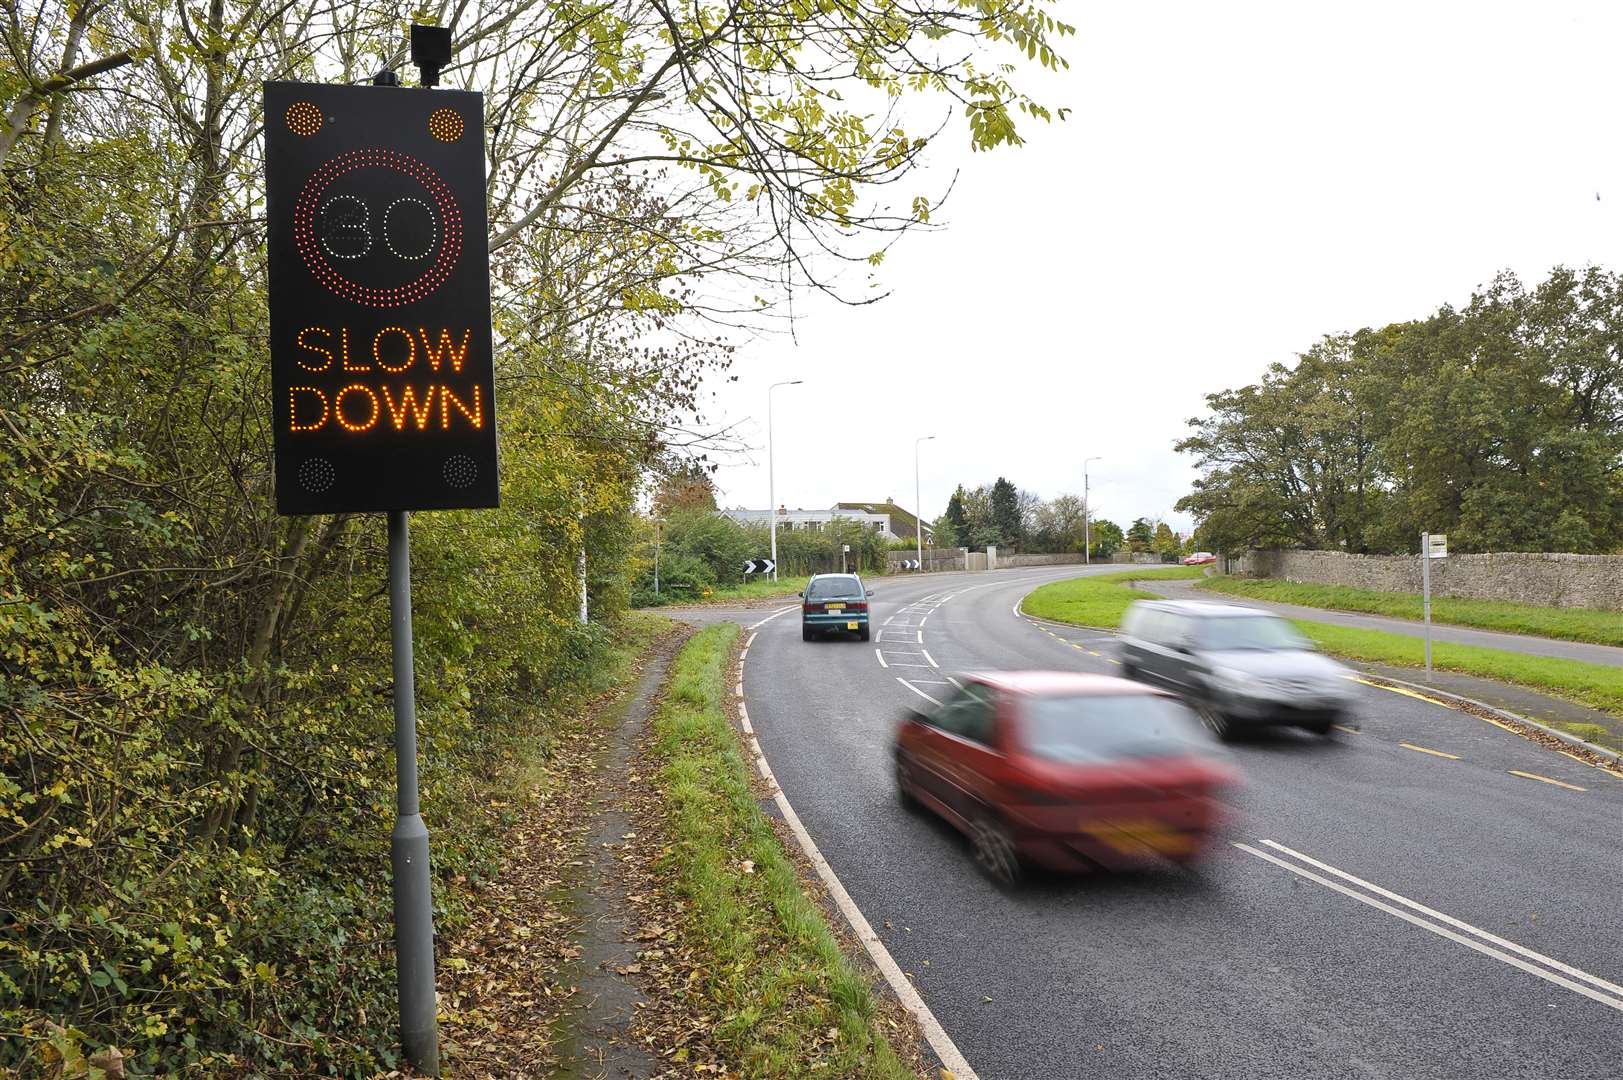 Recent figures showed that the number of drivers caught speeding in Kent during lockdown rose by 53% on the same time in 2019